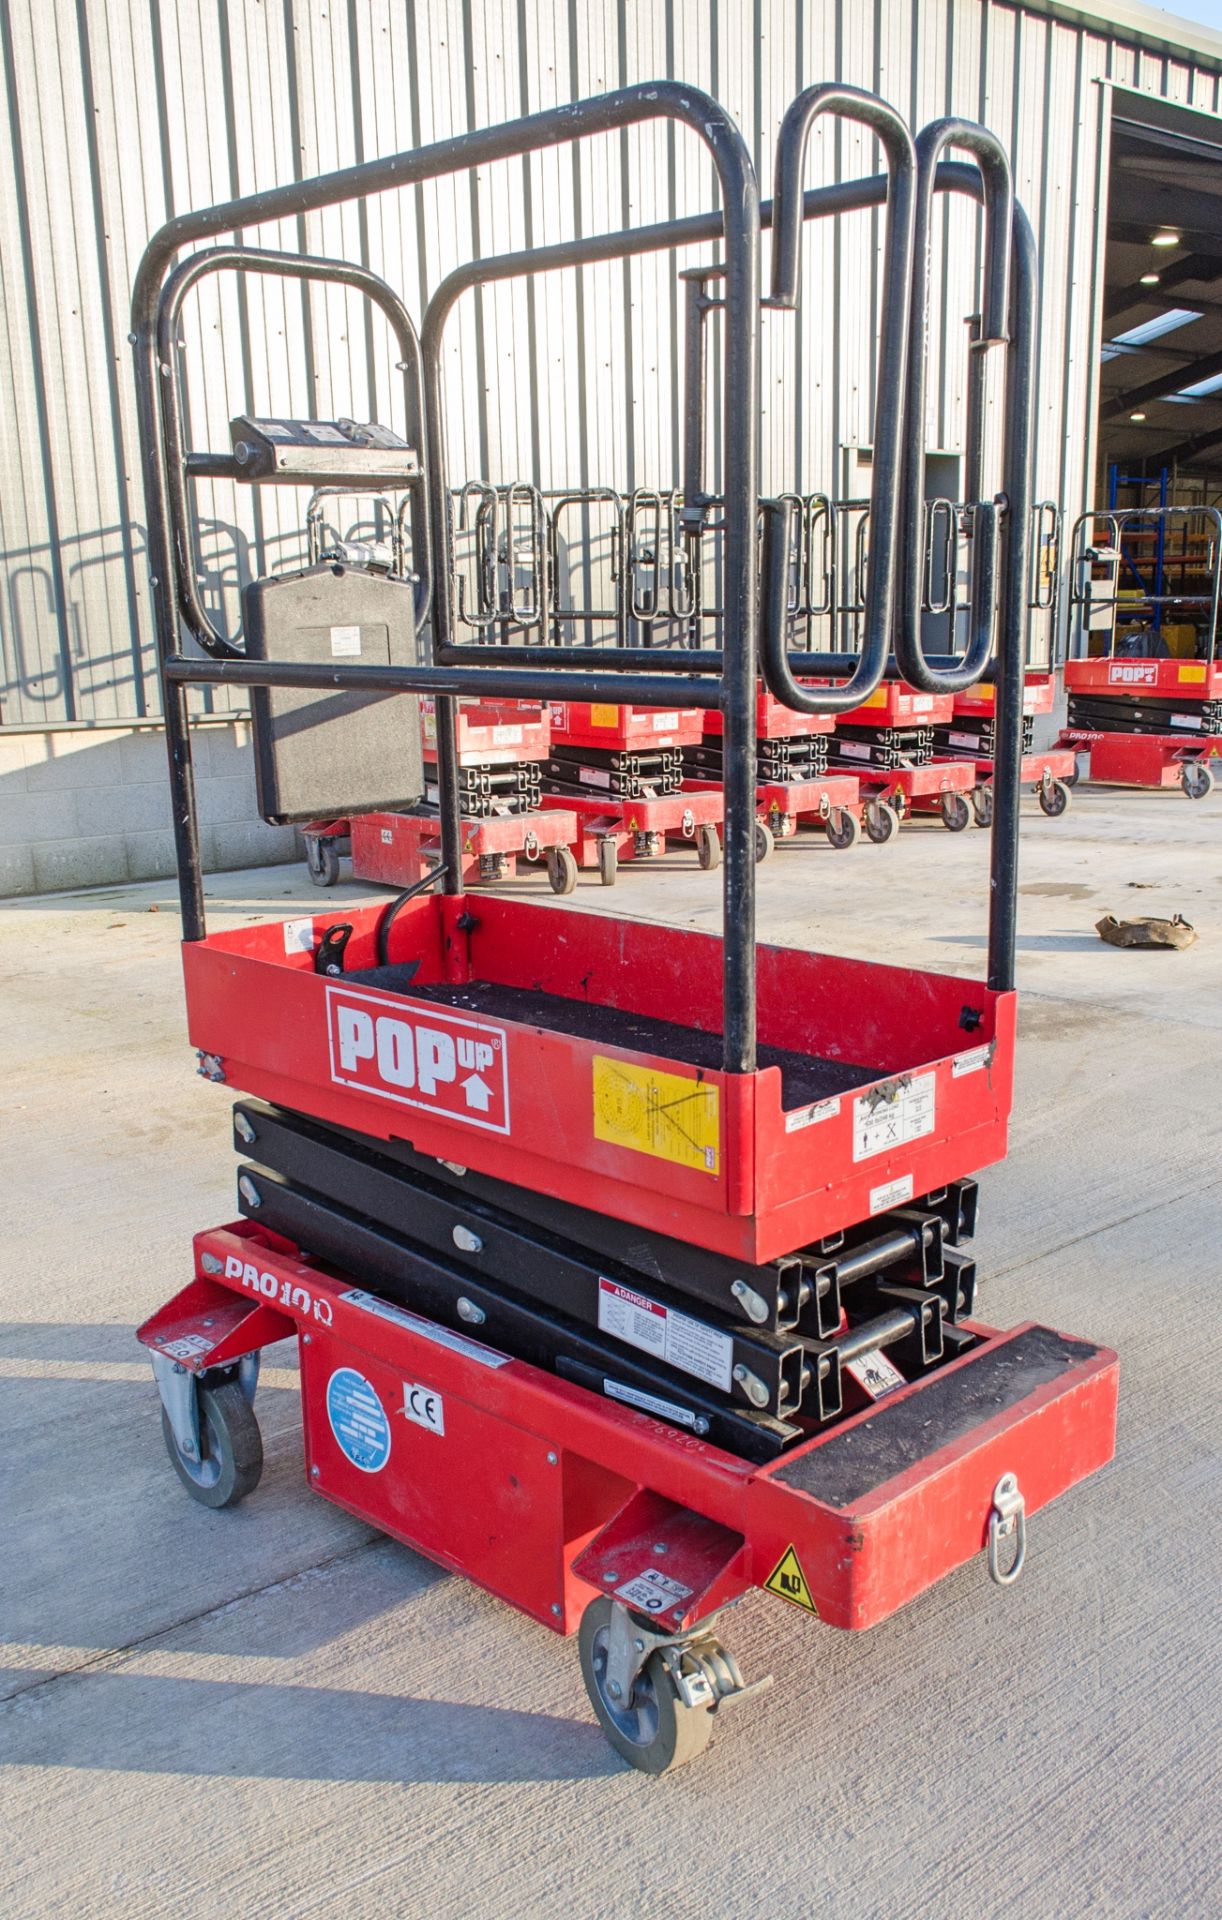 Pop Up Pro 10 battery electric push around scissor lift A769204 - Image 2 of 6